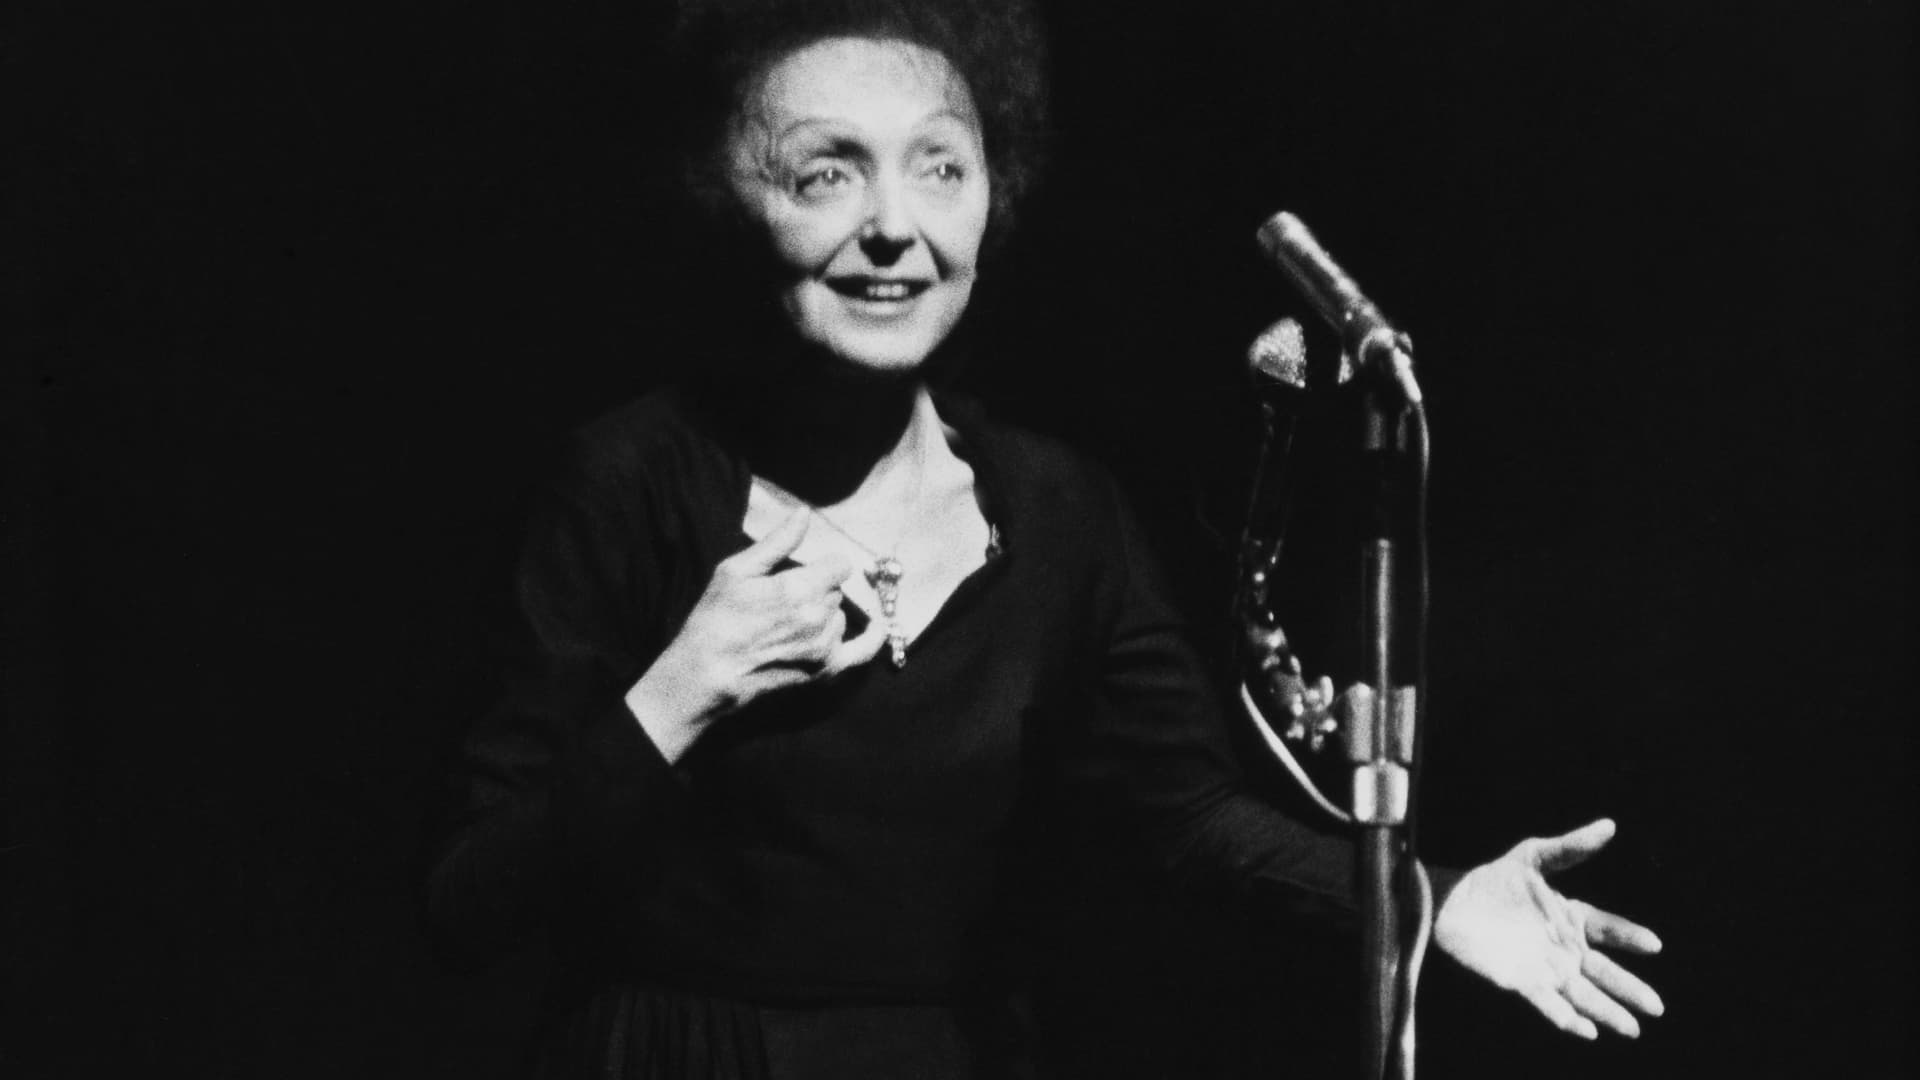 Edith Piaf biopic will be made with AI